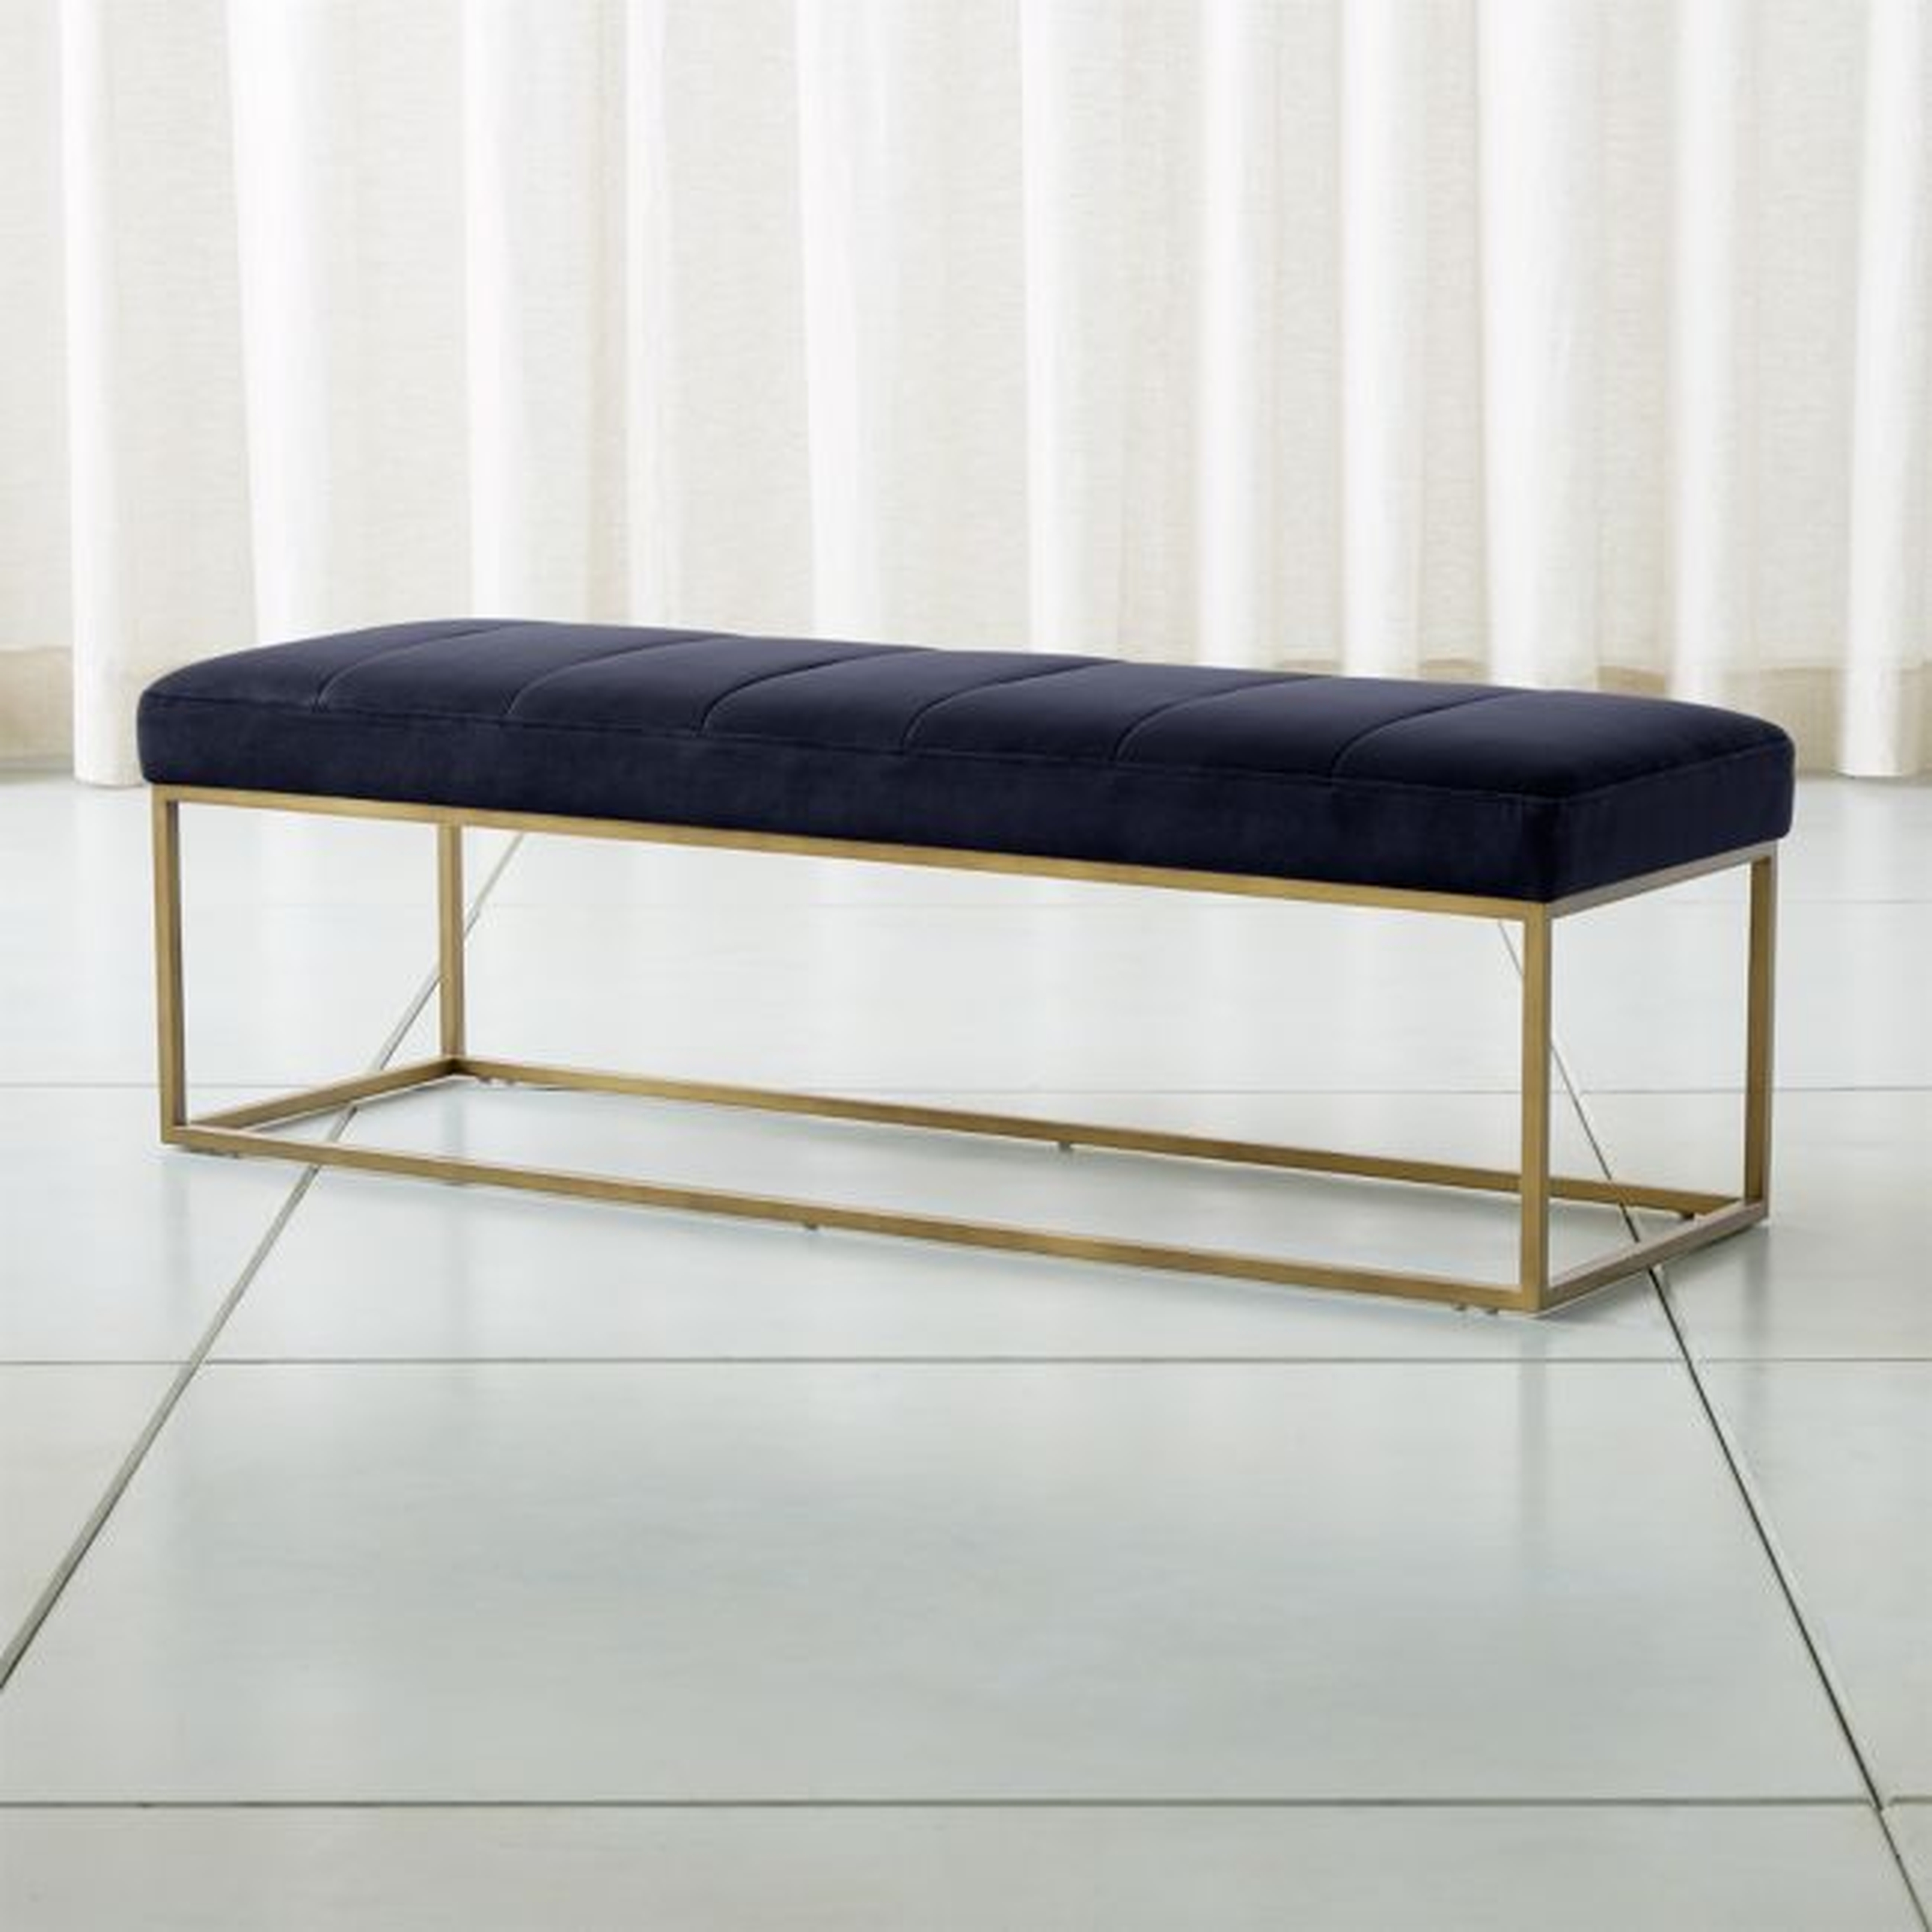 Channel Navy Velvet Bench with Brass Base - Crate and Barrel